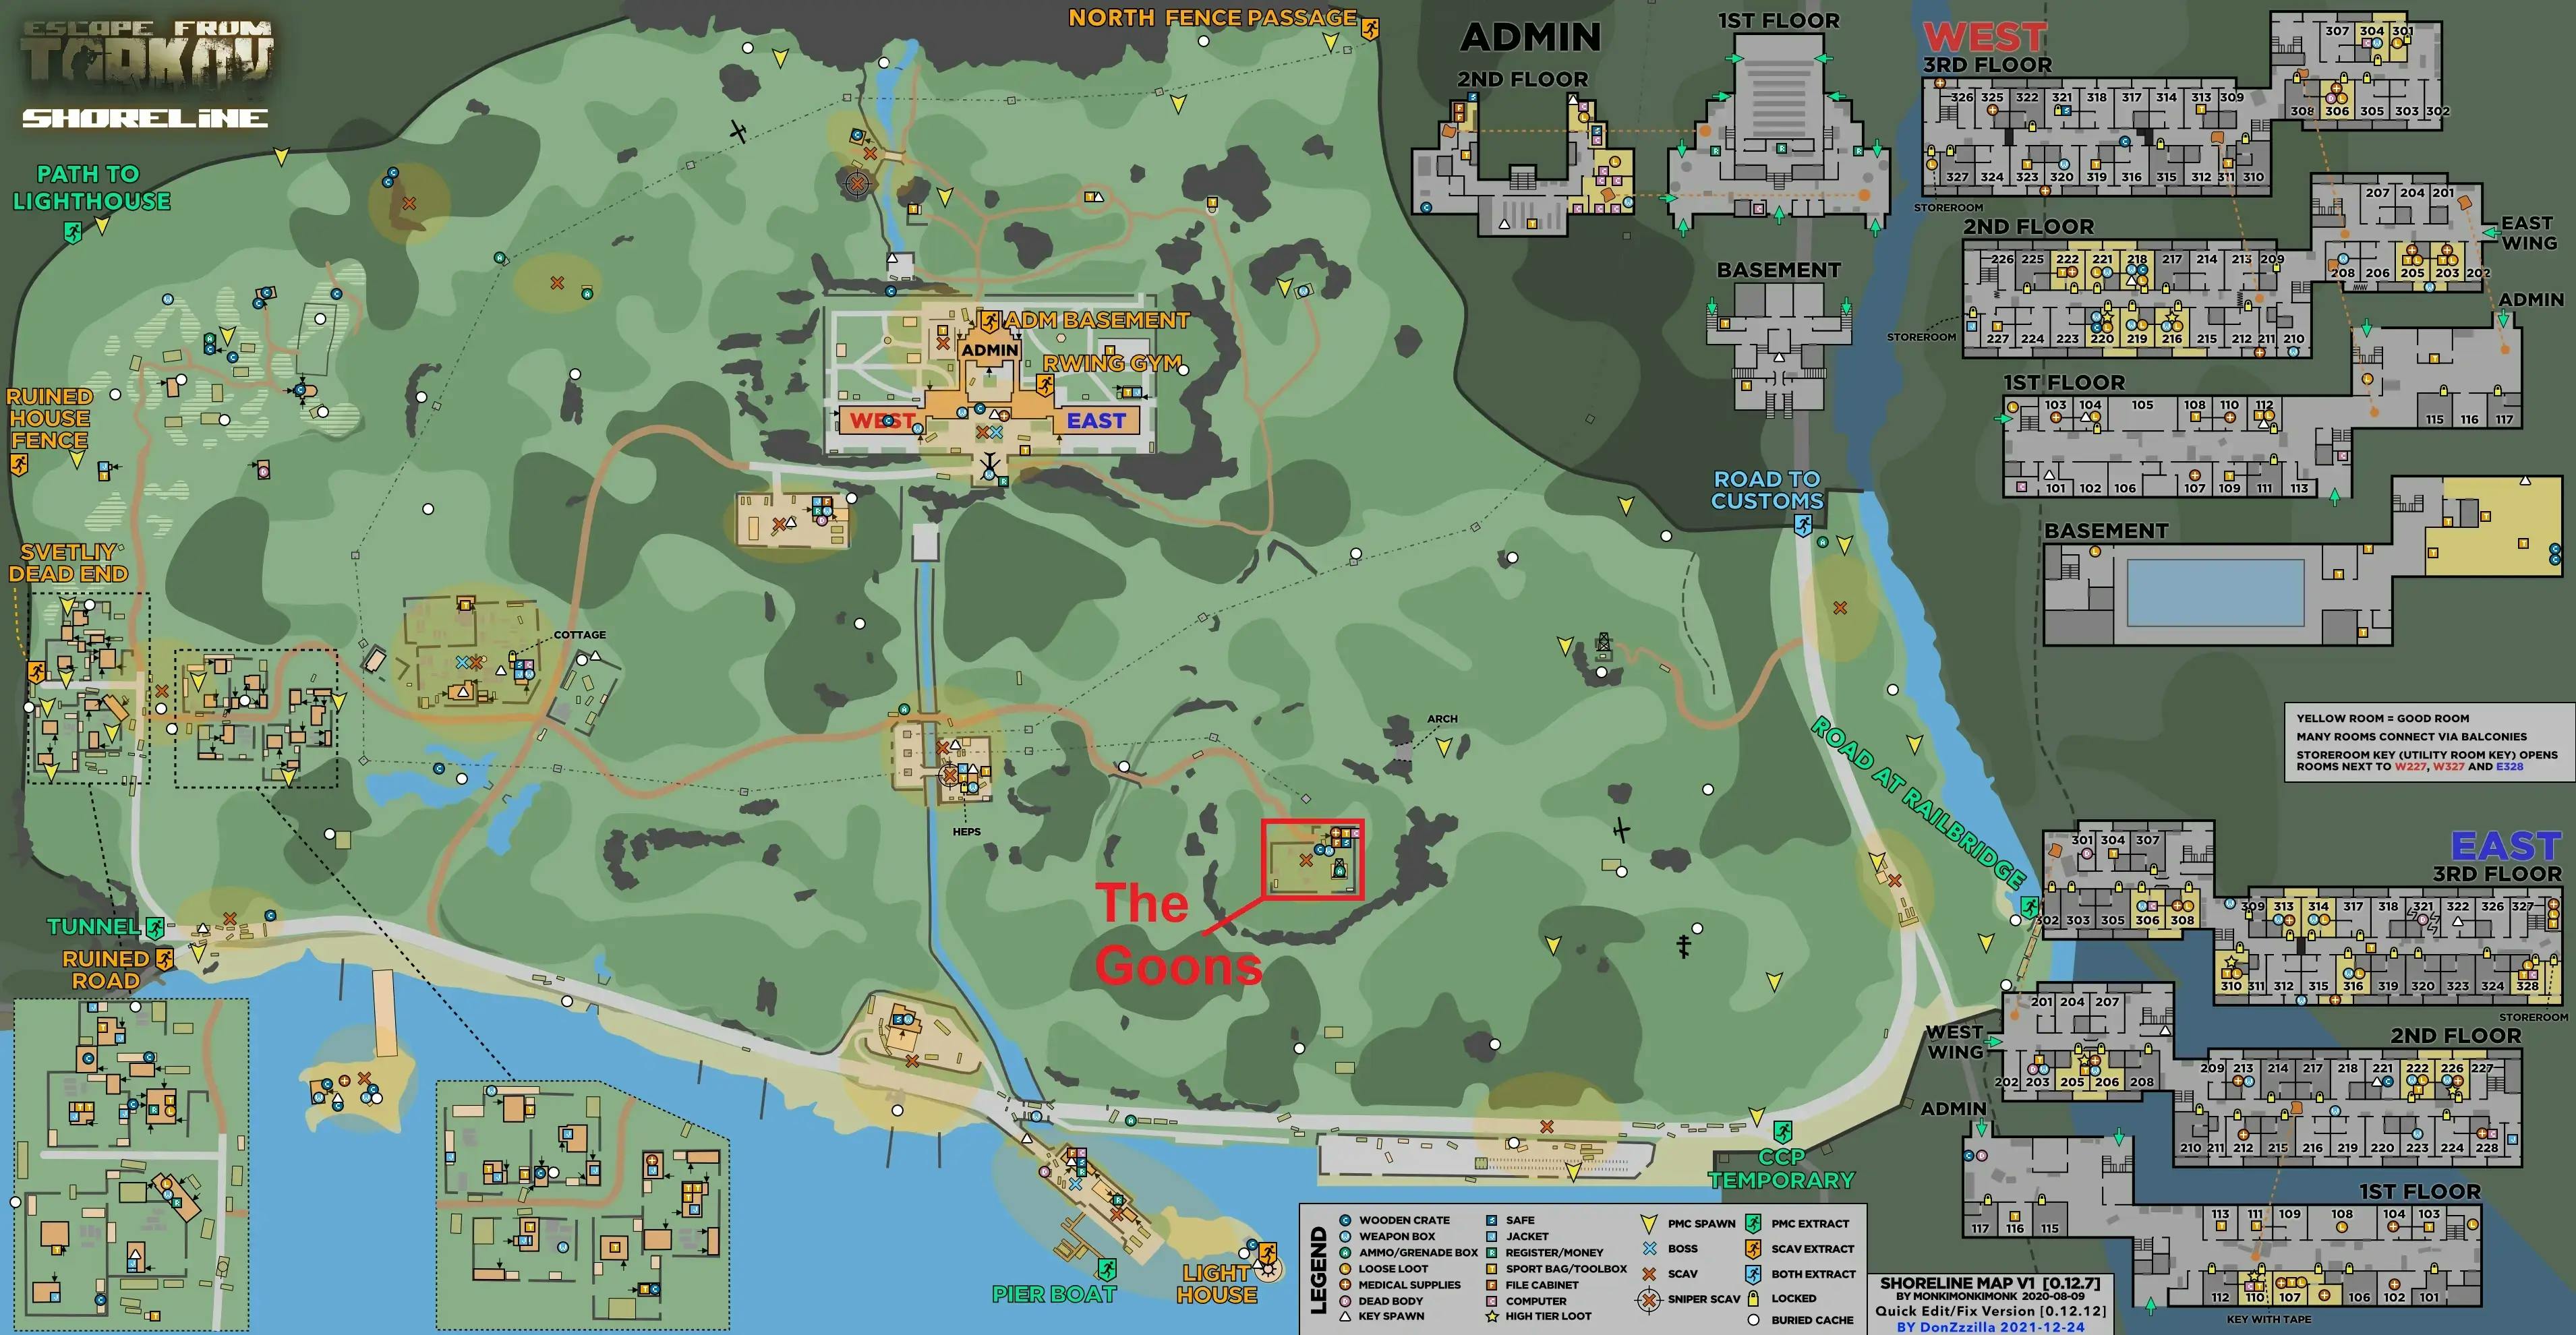 The Goons location on the map Shoreline for the game Escape from Tarkov